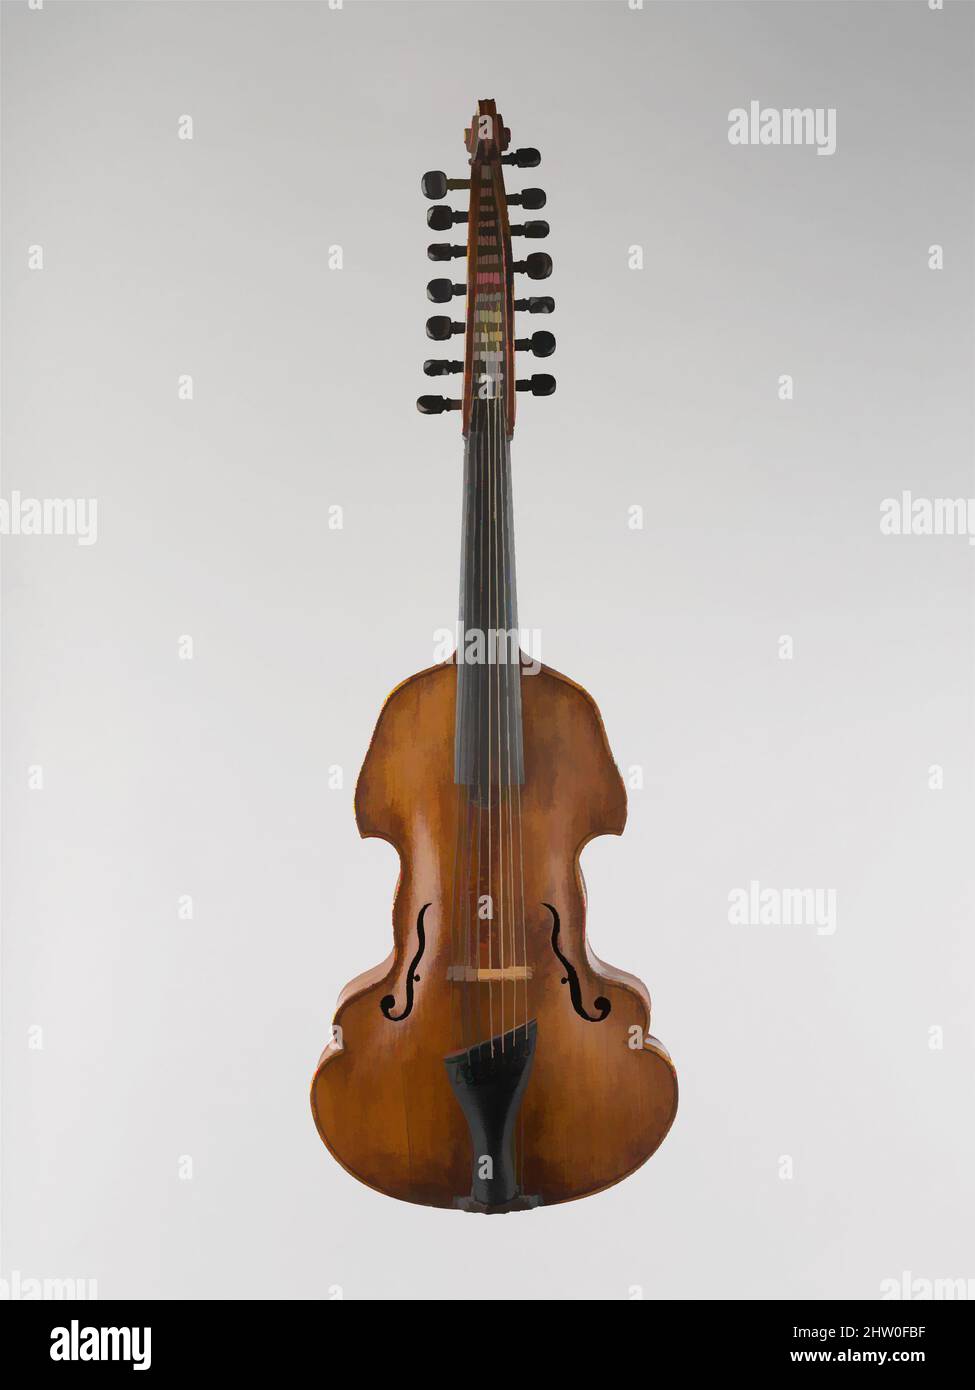 Art inspired by Viola d'Amore, 1739, Augsburg, Germany, German, Spruce, maple, L. 82.9 cm, Body L. 42.4 cm, String L. 39 cm approx., Chordophone-Lute-bowed-unfretted, Classic works modernized by Artotop with a splash of modernity. Shapes, color and value, eye-catching visual impact on art. Emotions through freedom of artworks in a contemporary way. A timeless message pursuing a wildly creative new direction. Artists turning to the digital medium and creating the Artotop NFT Stock Photo